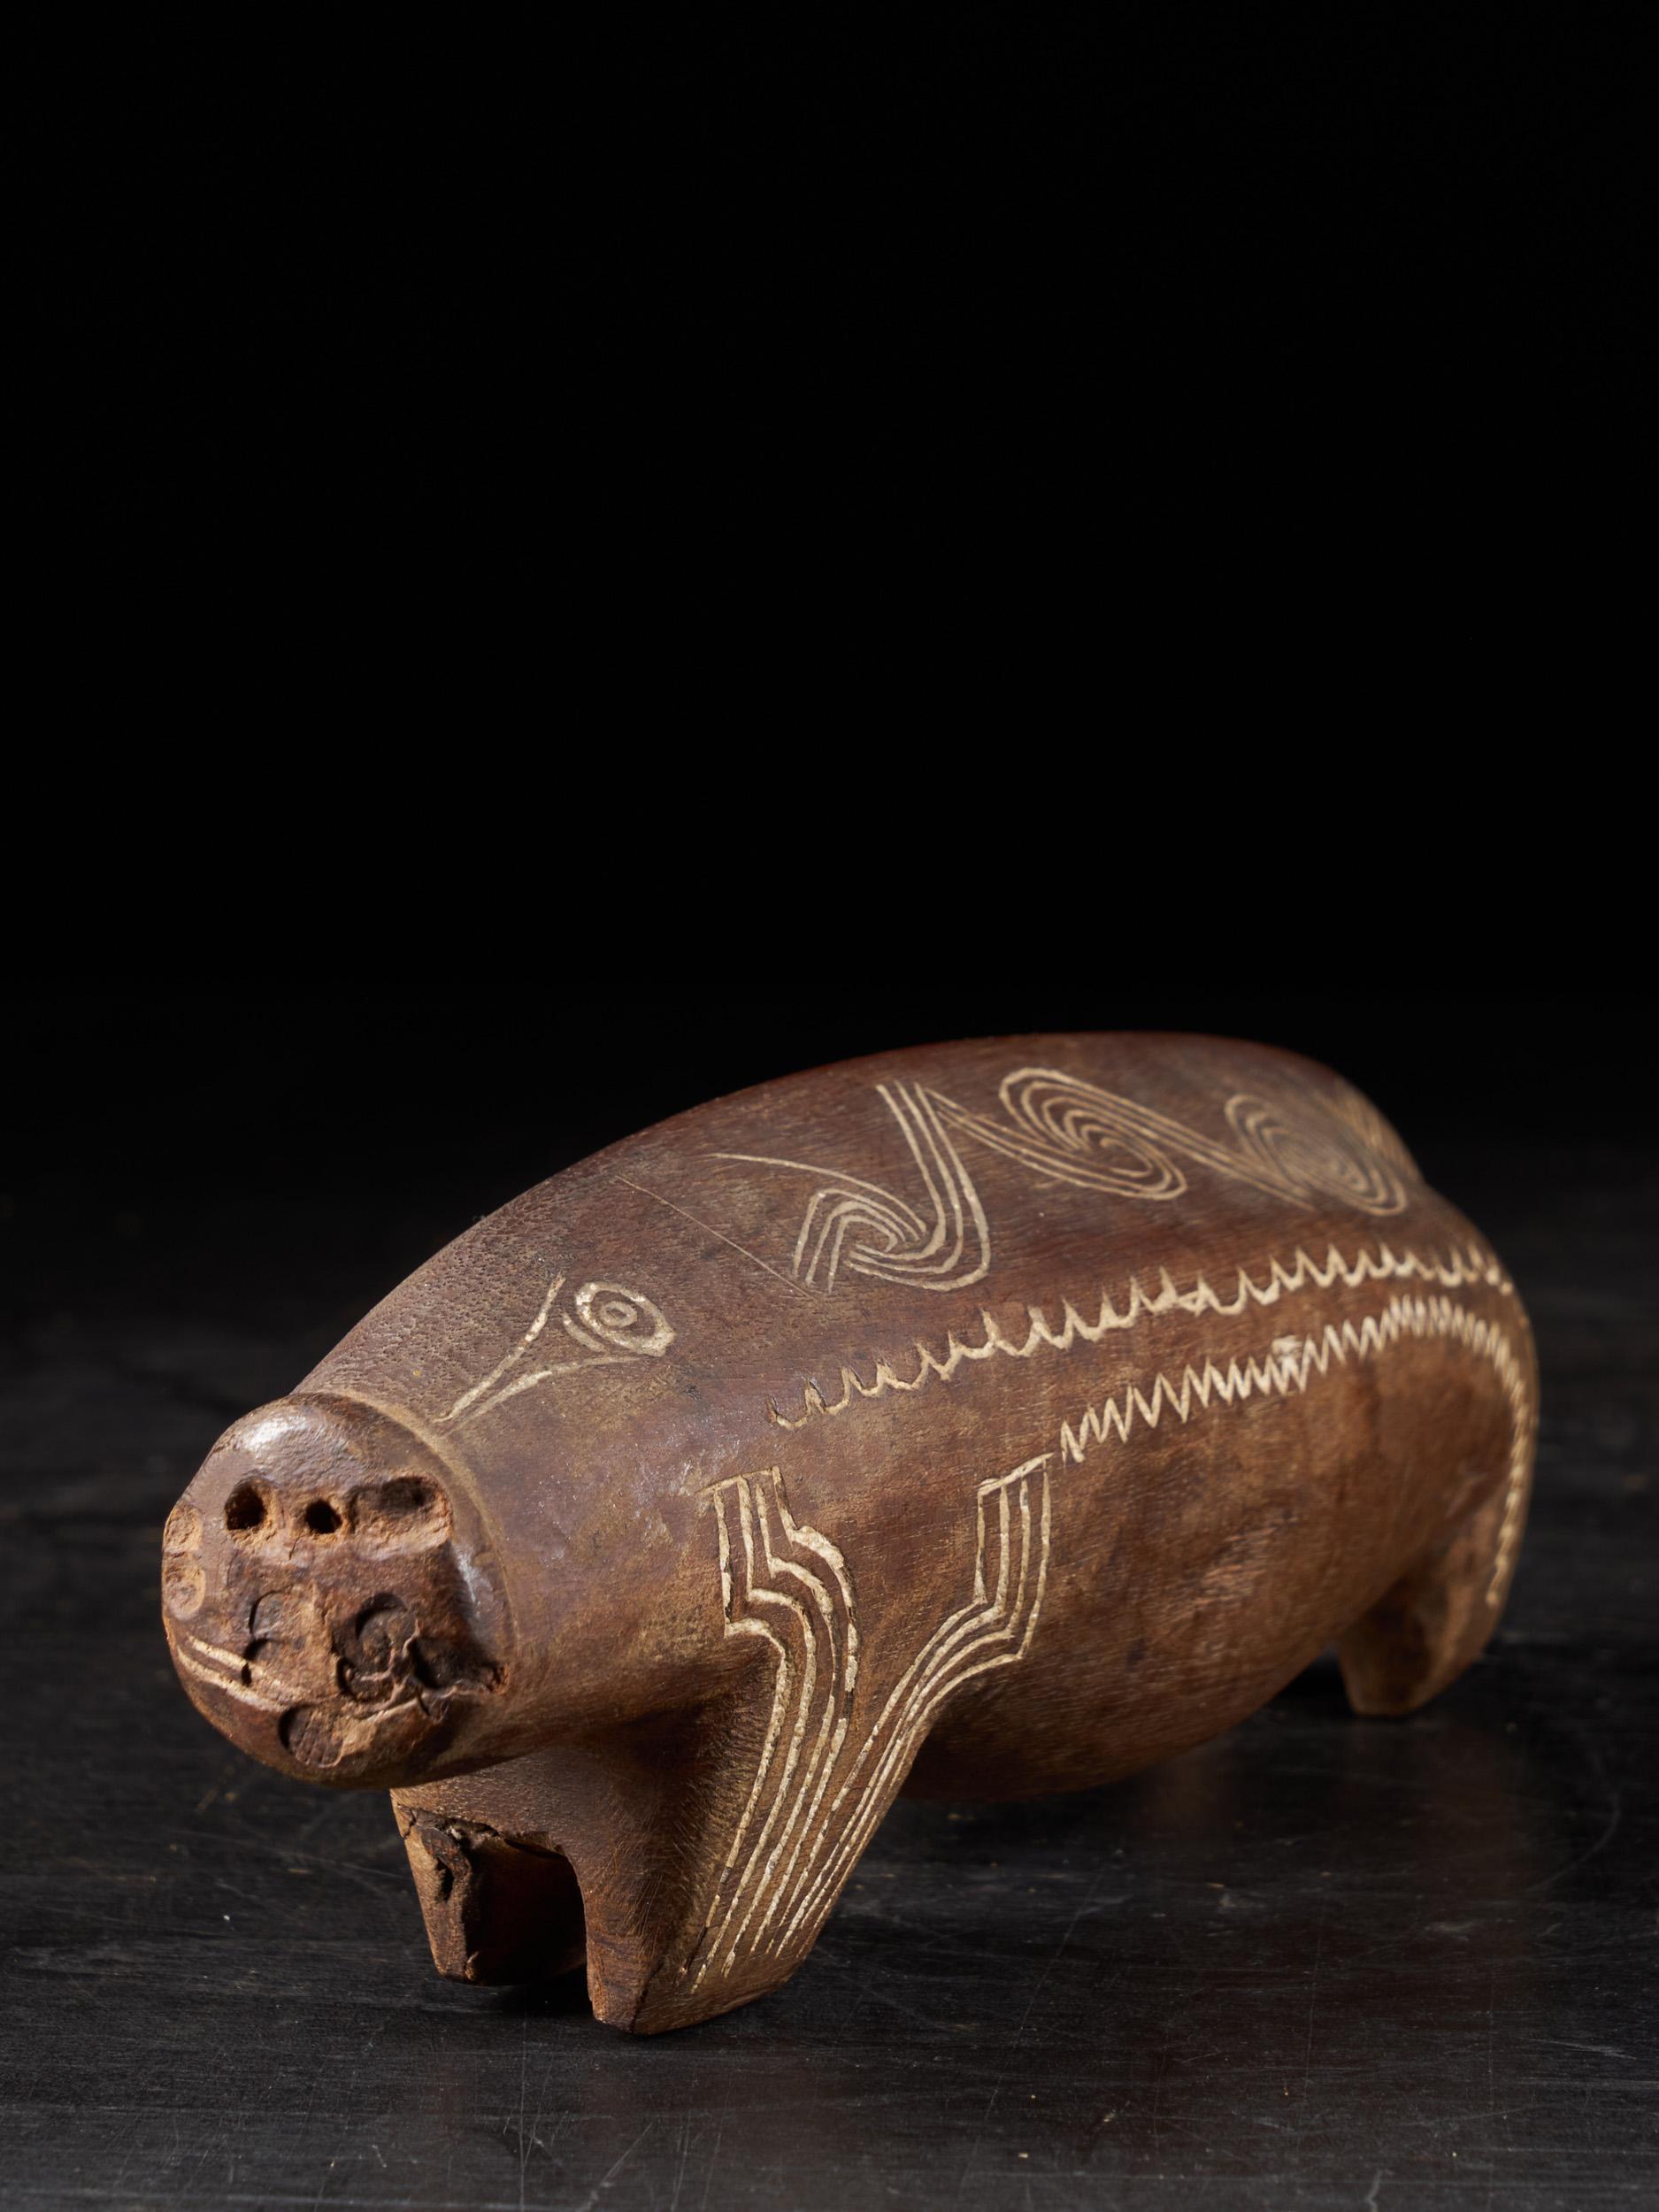 Papua New Guinean Ethno Design Massim People, Trobiand Islands, Wooden Charm Pig Sculpture For Sale